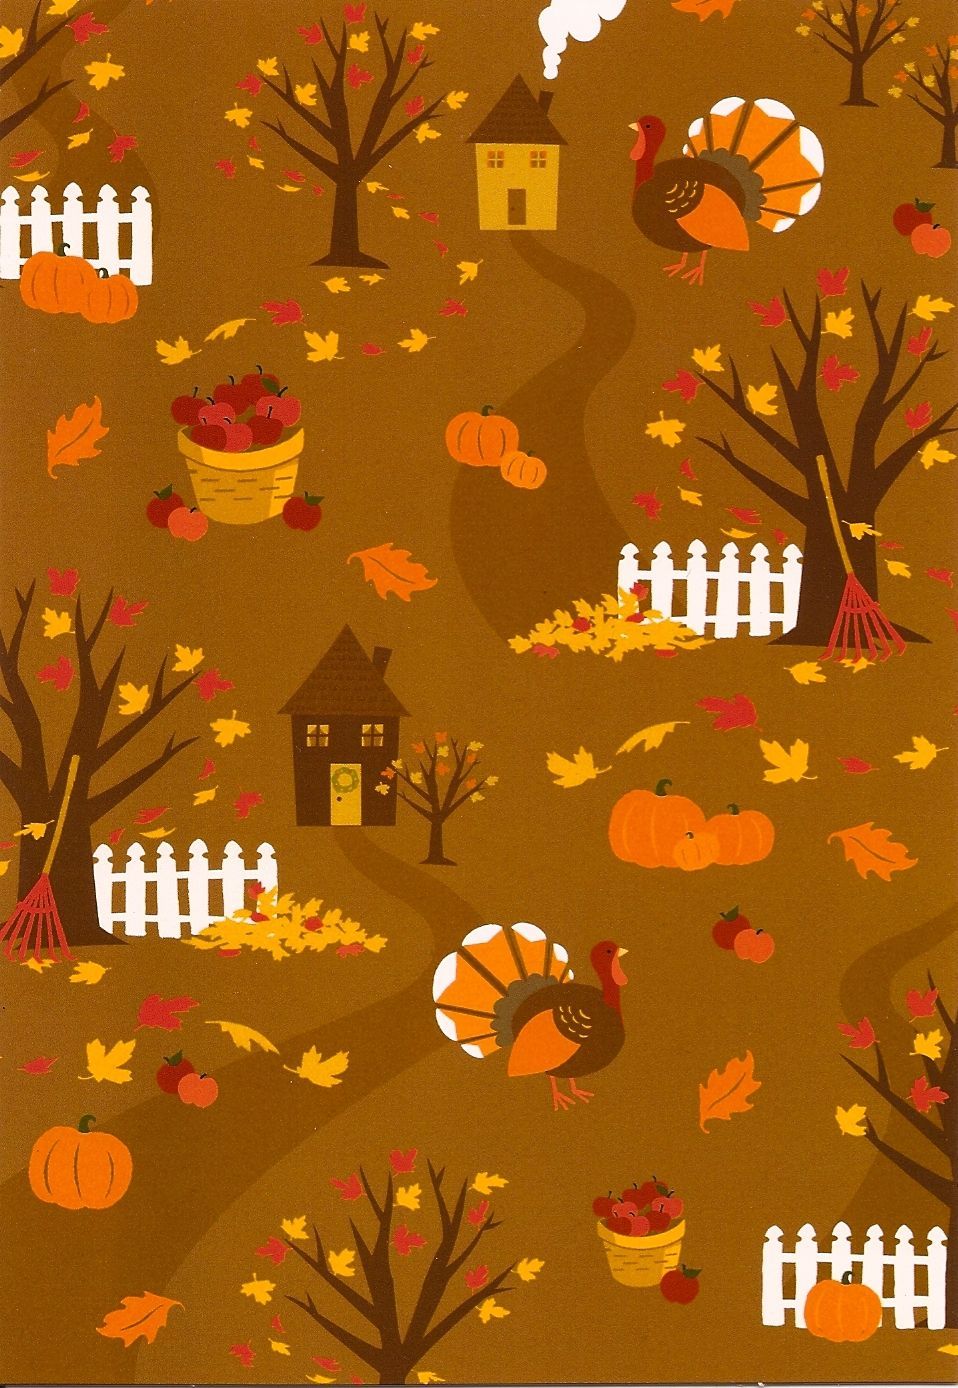 Thanksgiving Background Iphone